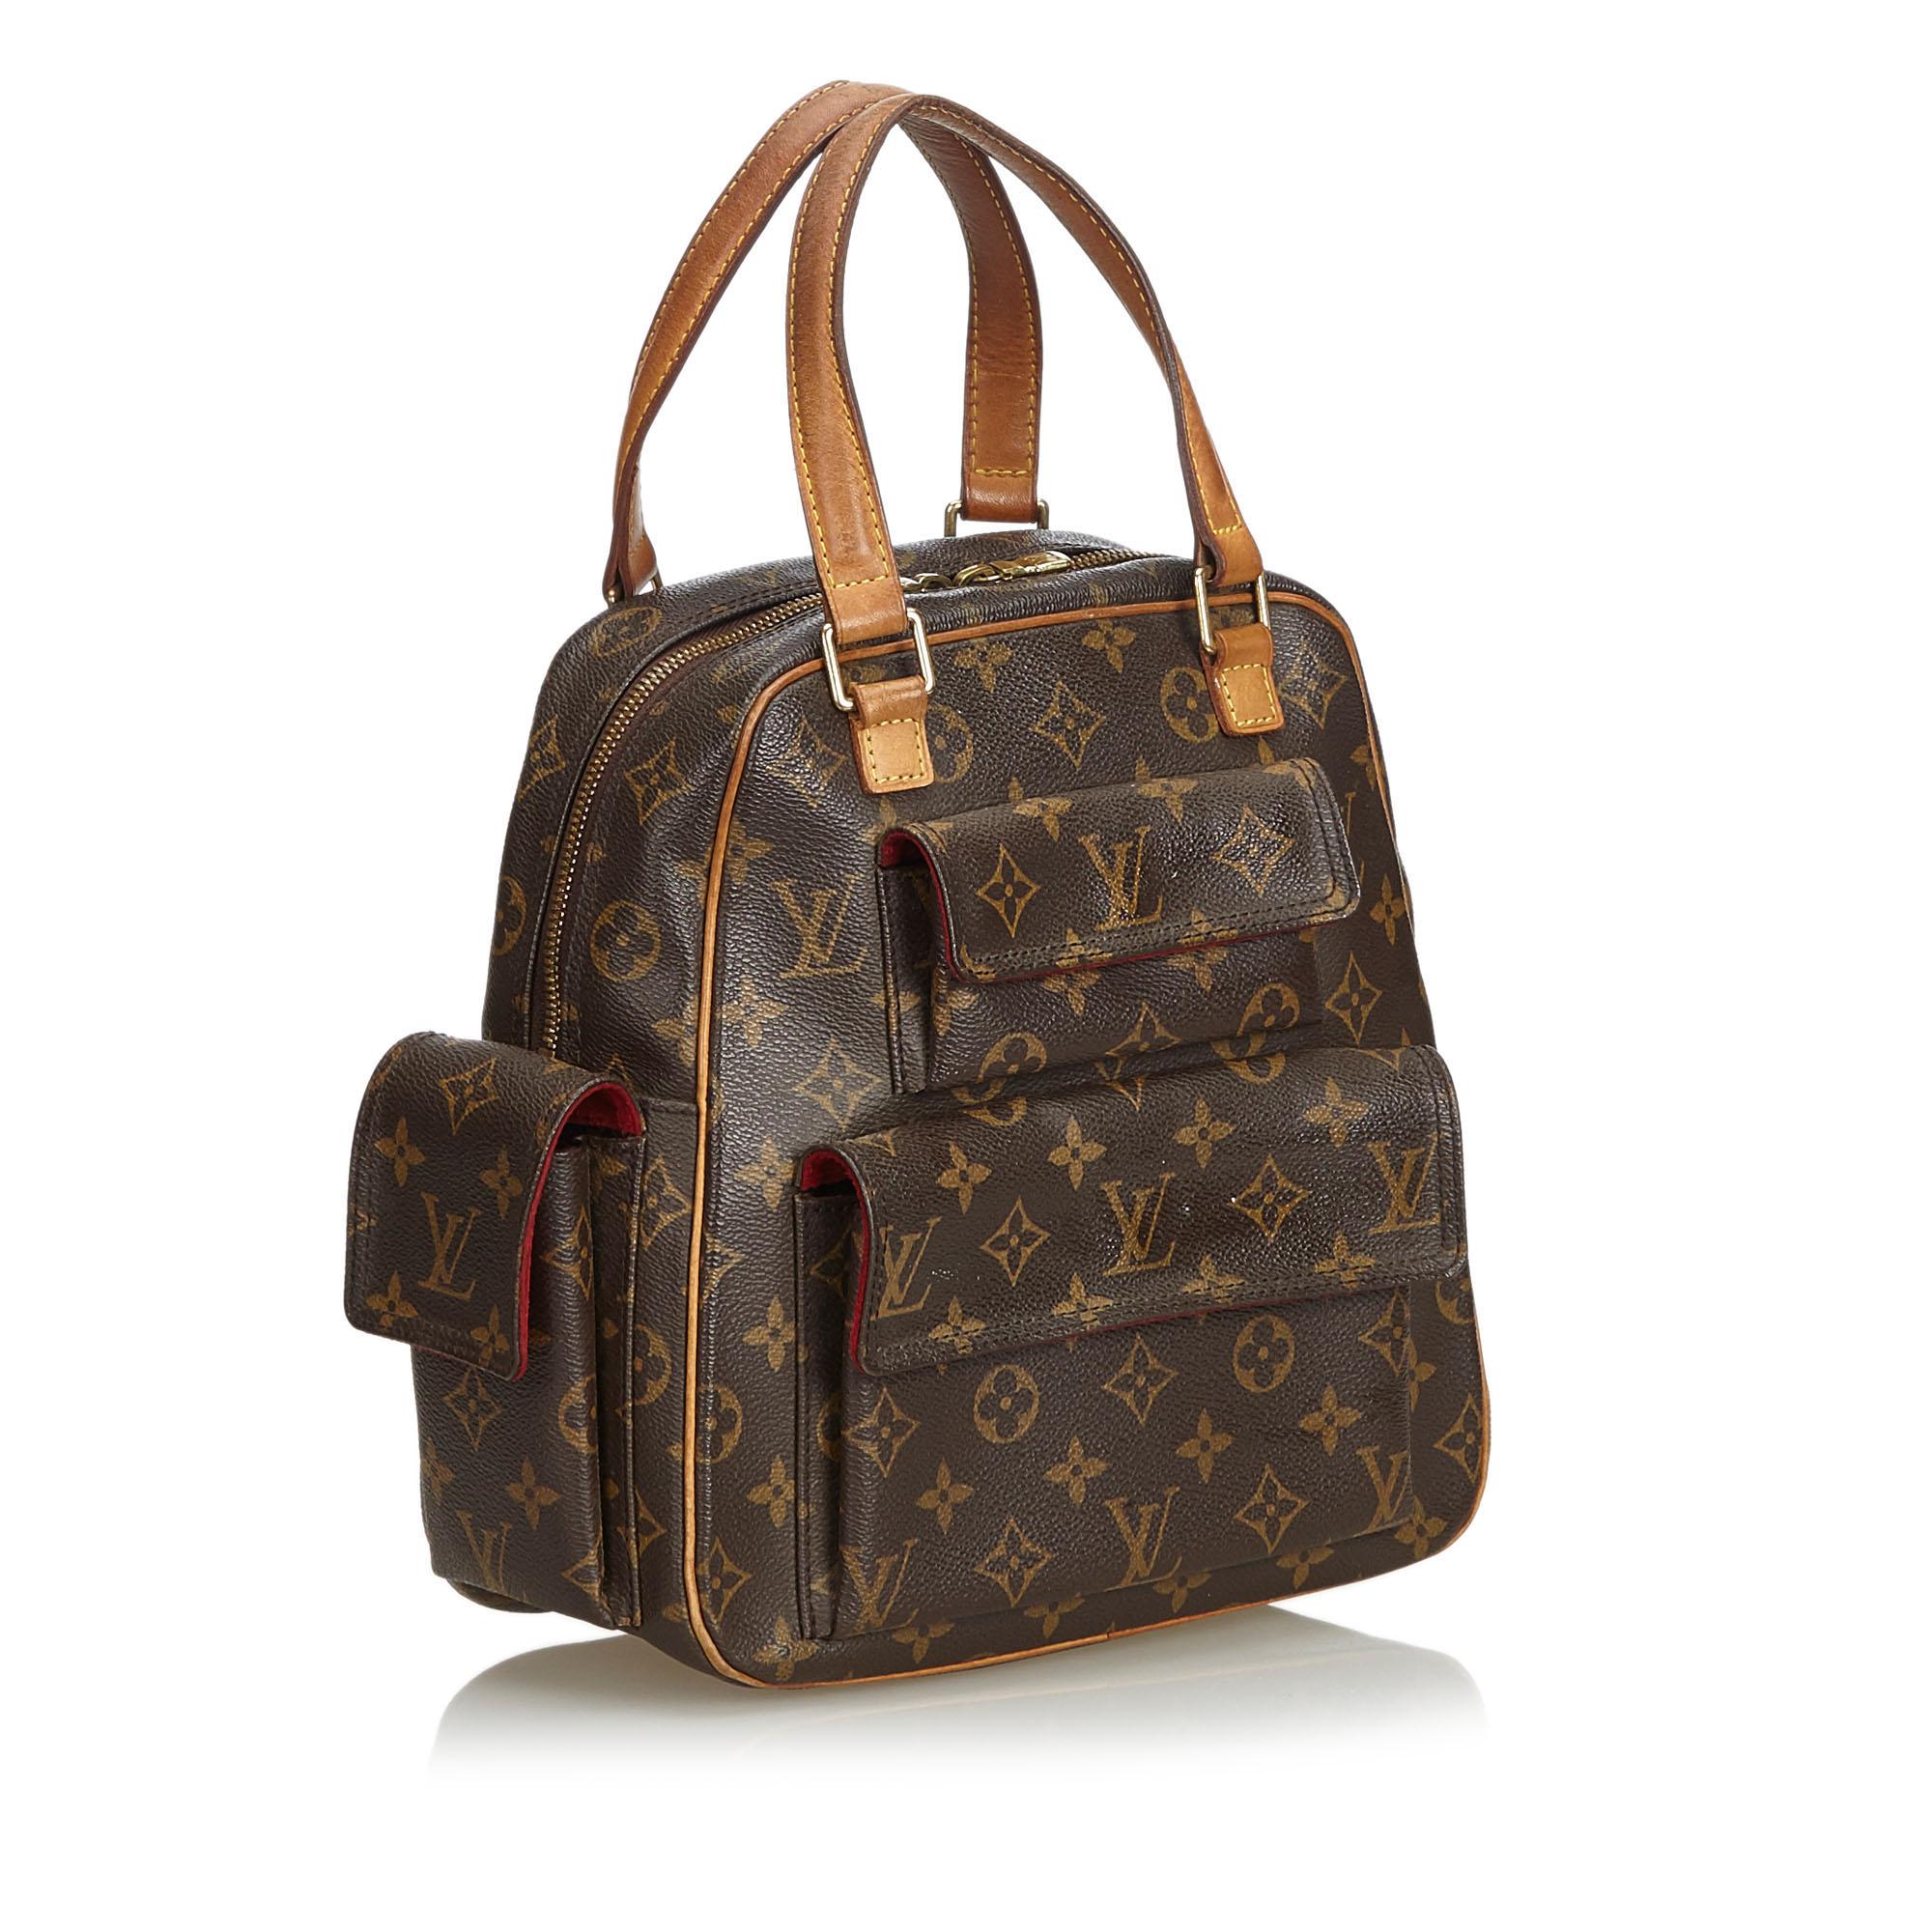 The Excentri-Cite features the Monogram canvas, flat vachetta straps and trim, exterior flap pockets, a two-way top zip closure, and interior pockets. It carries as B condition rating.

Inclusions: 
Dust Bag

Louis Vuitton pieces do not come with an